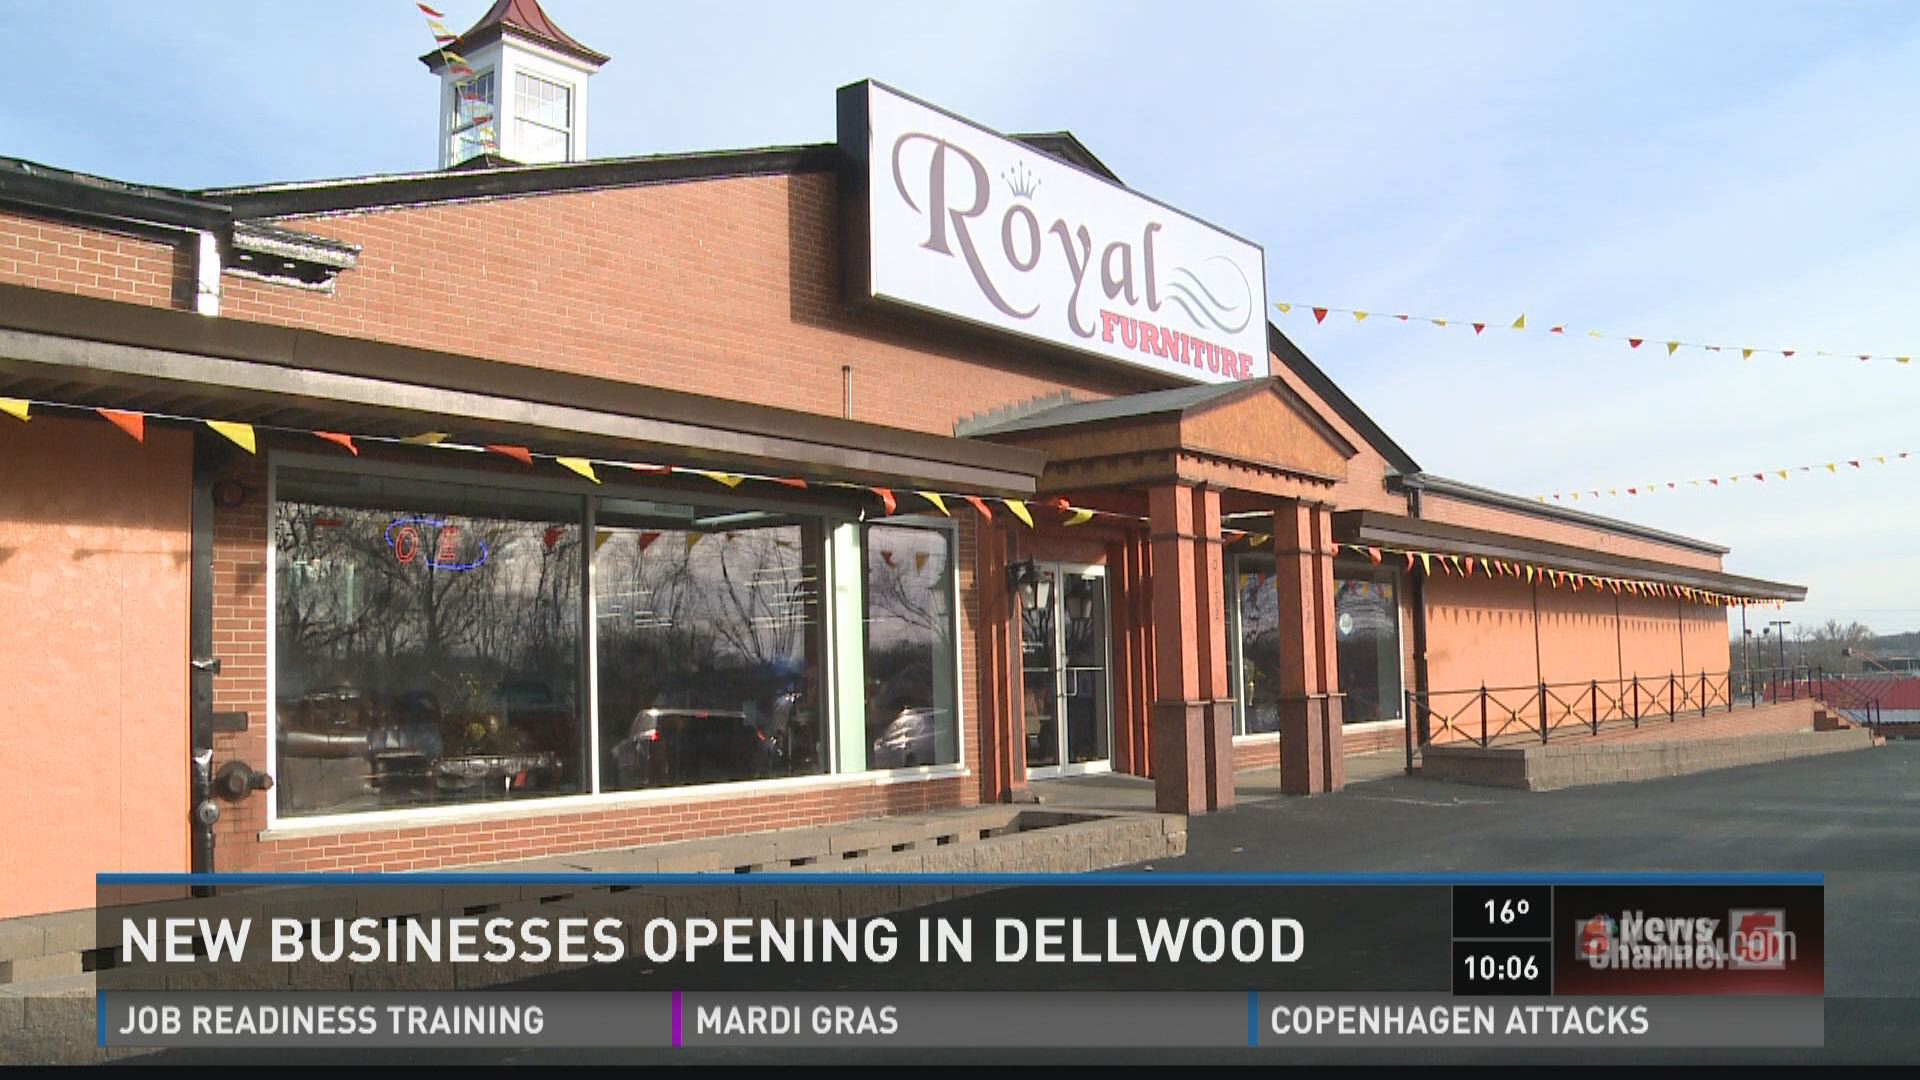 New businesses opening in Dellwood | www.bagssaleusa.com/louis-vuitton/